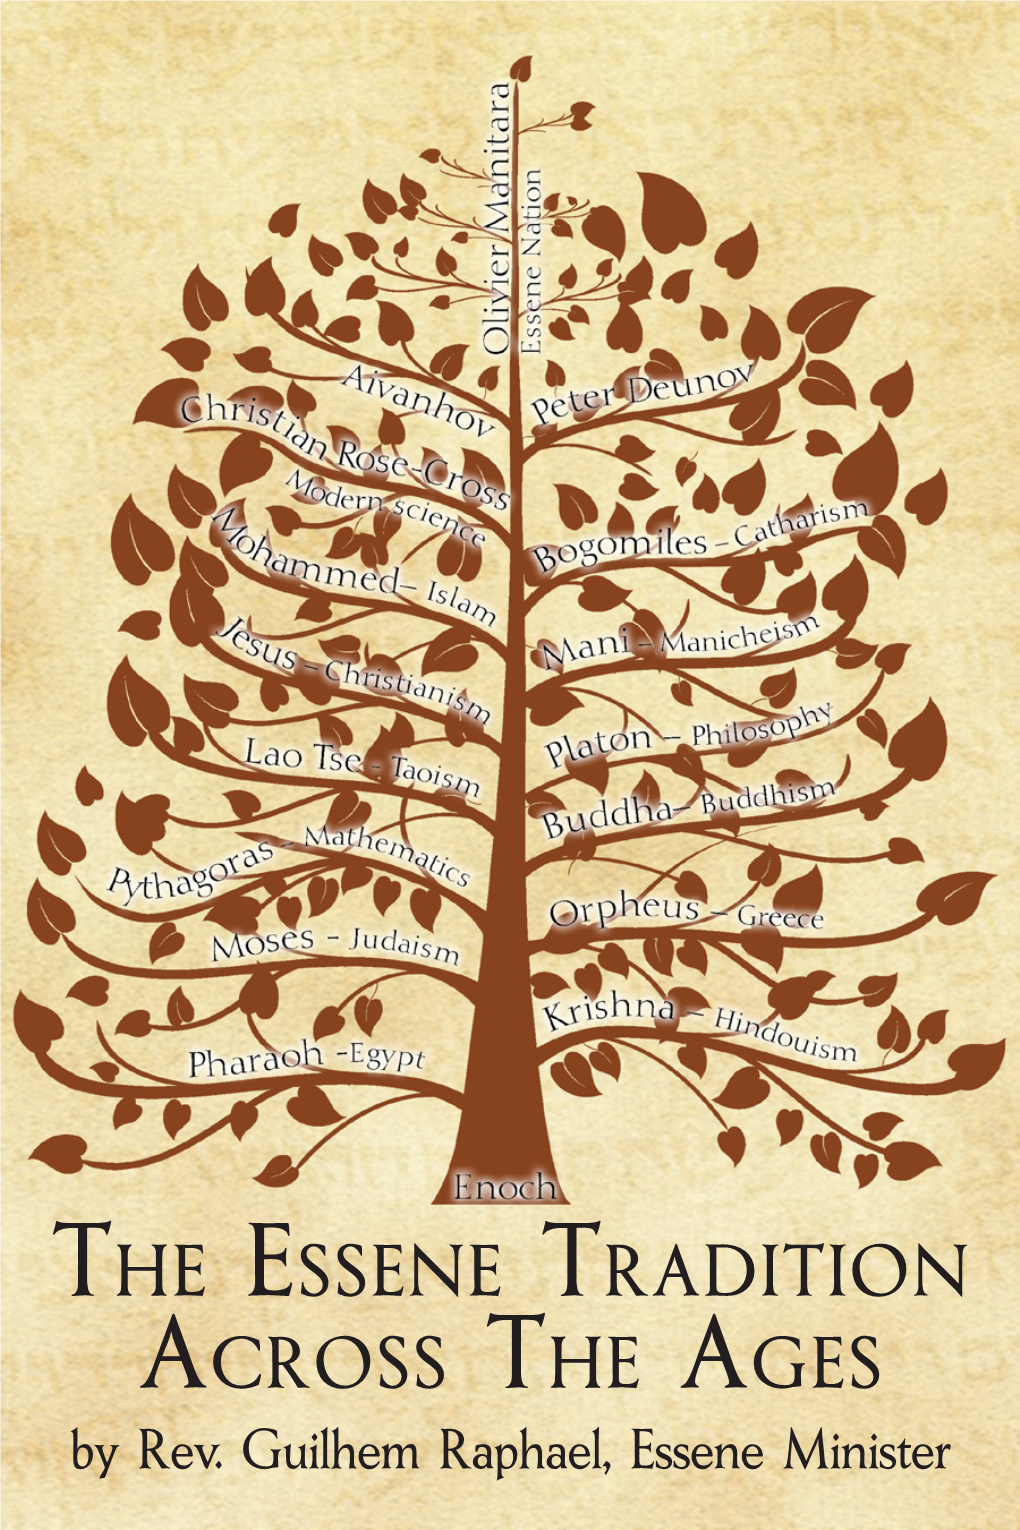 The Essene Tradition Across the Ages.Indd